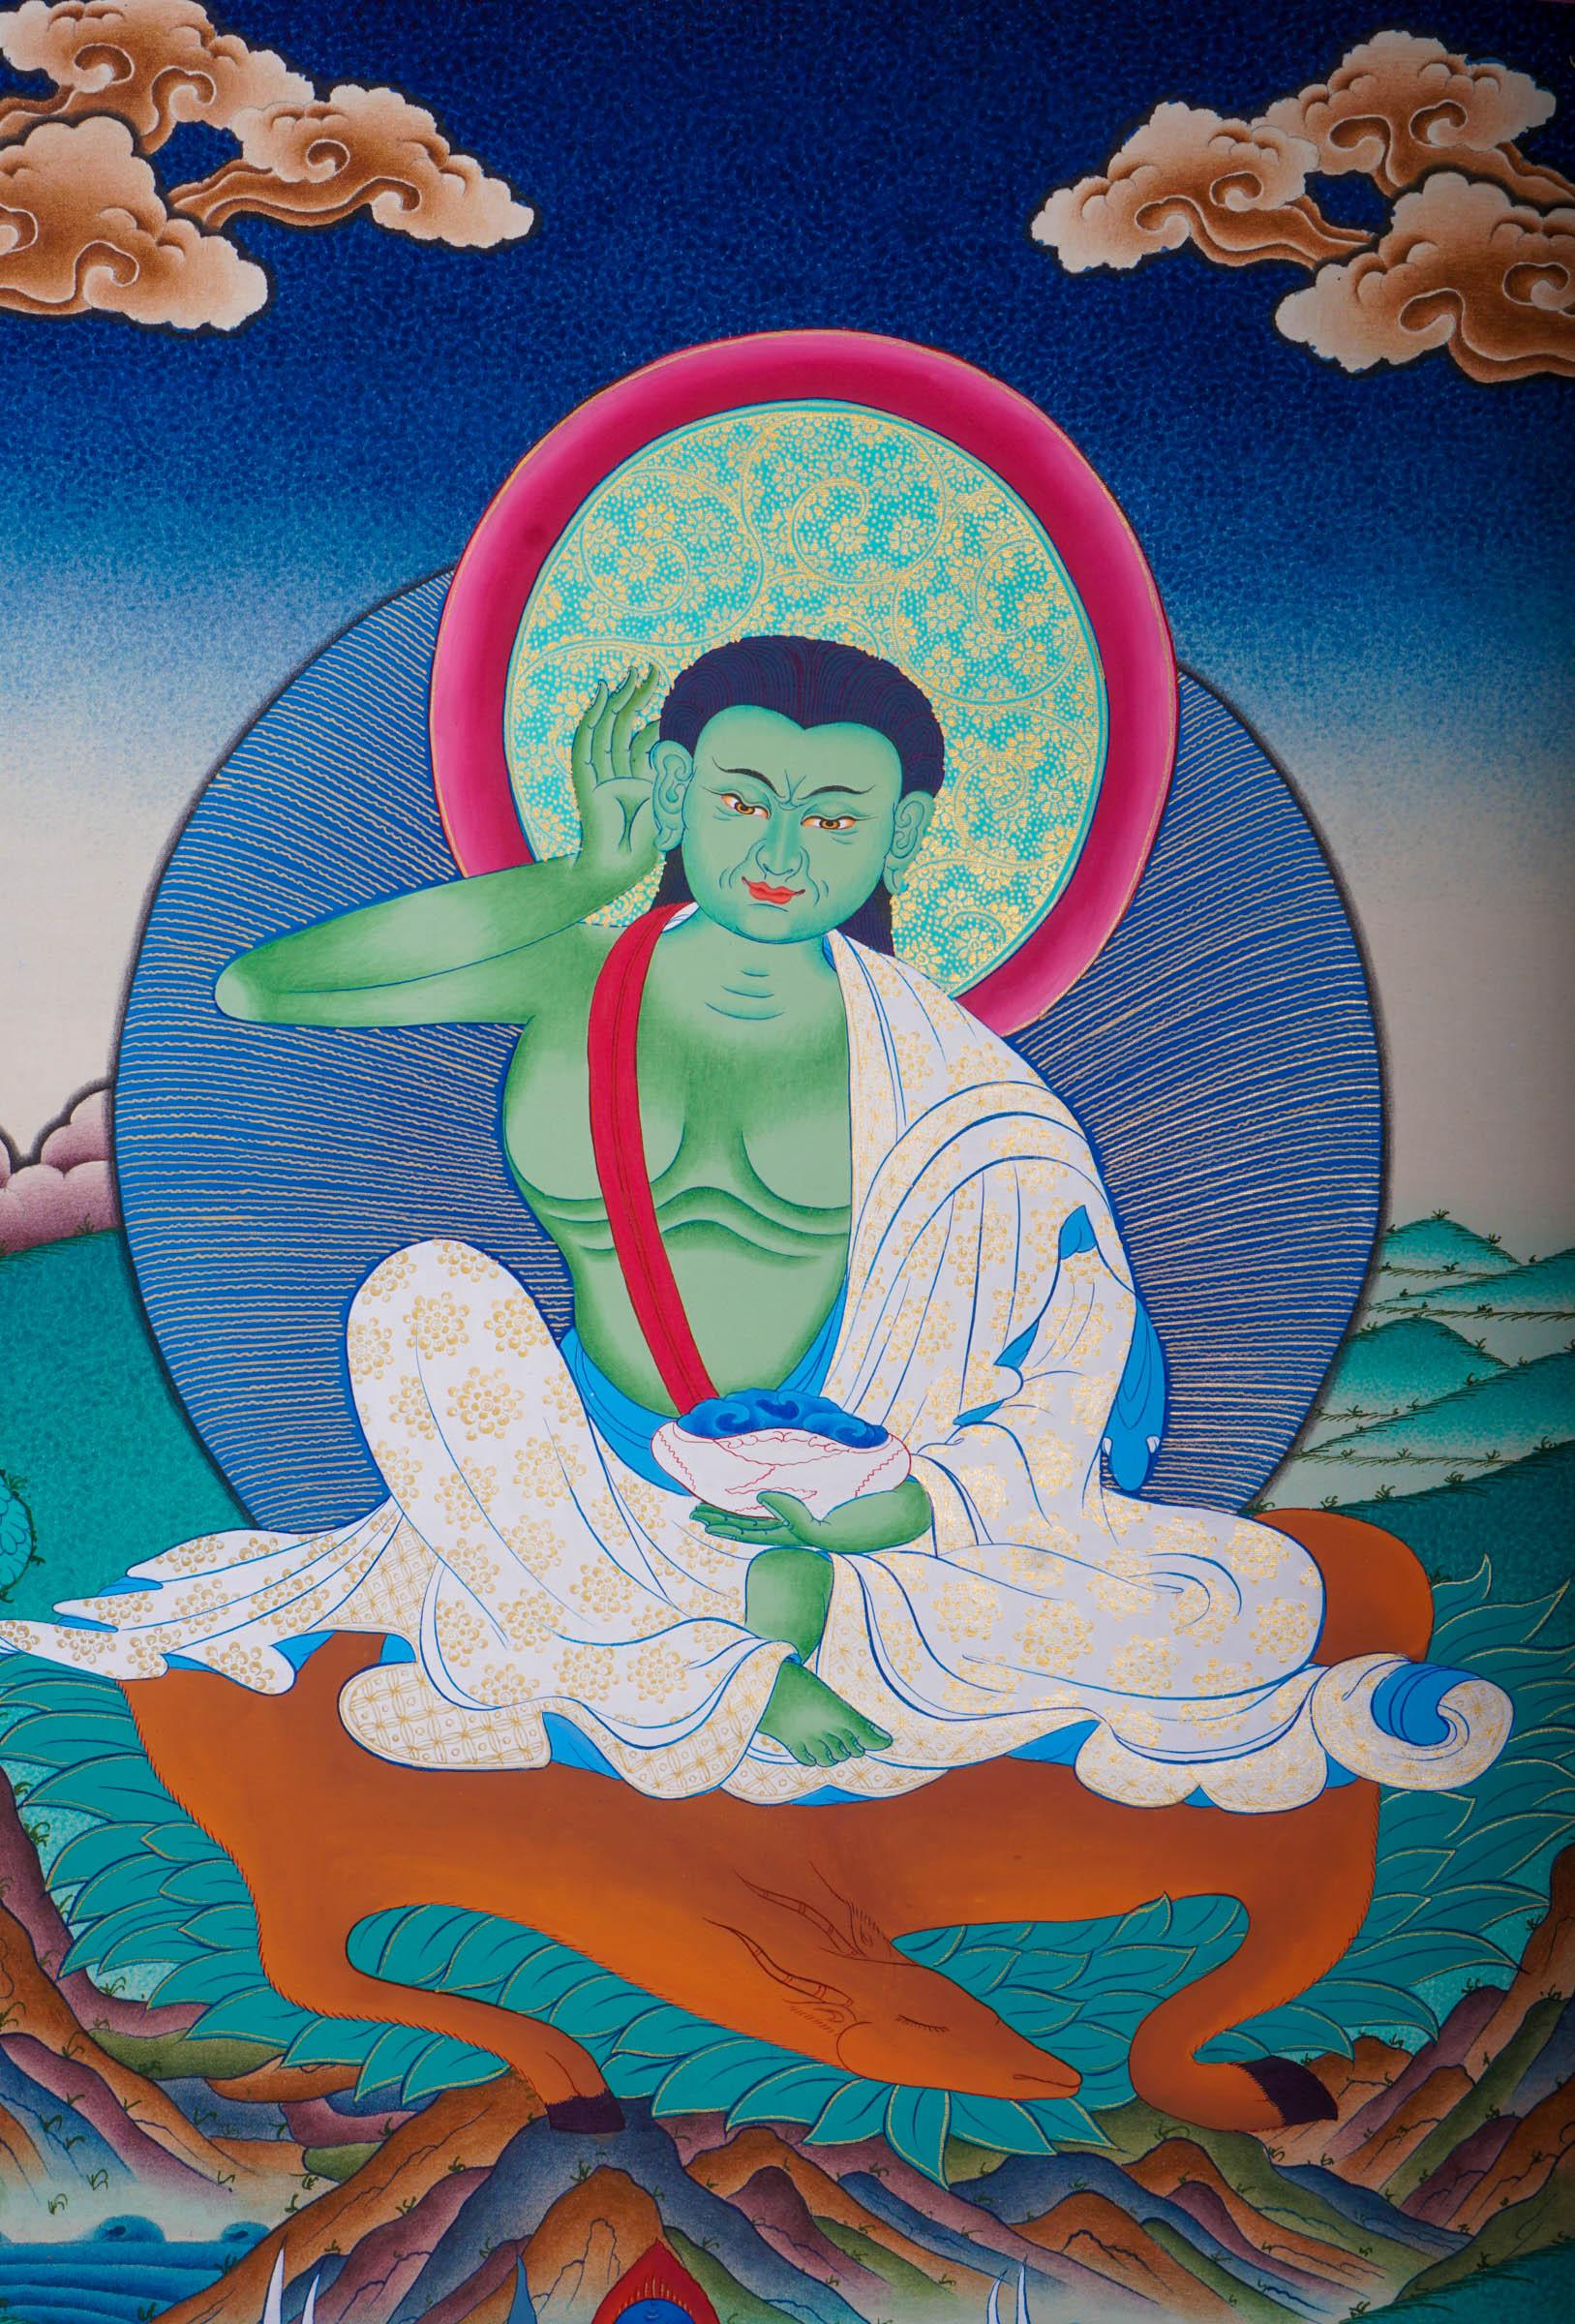 Tibetan thangka art of Milarepa with green Body draped in white clothed and holds a begging bowl